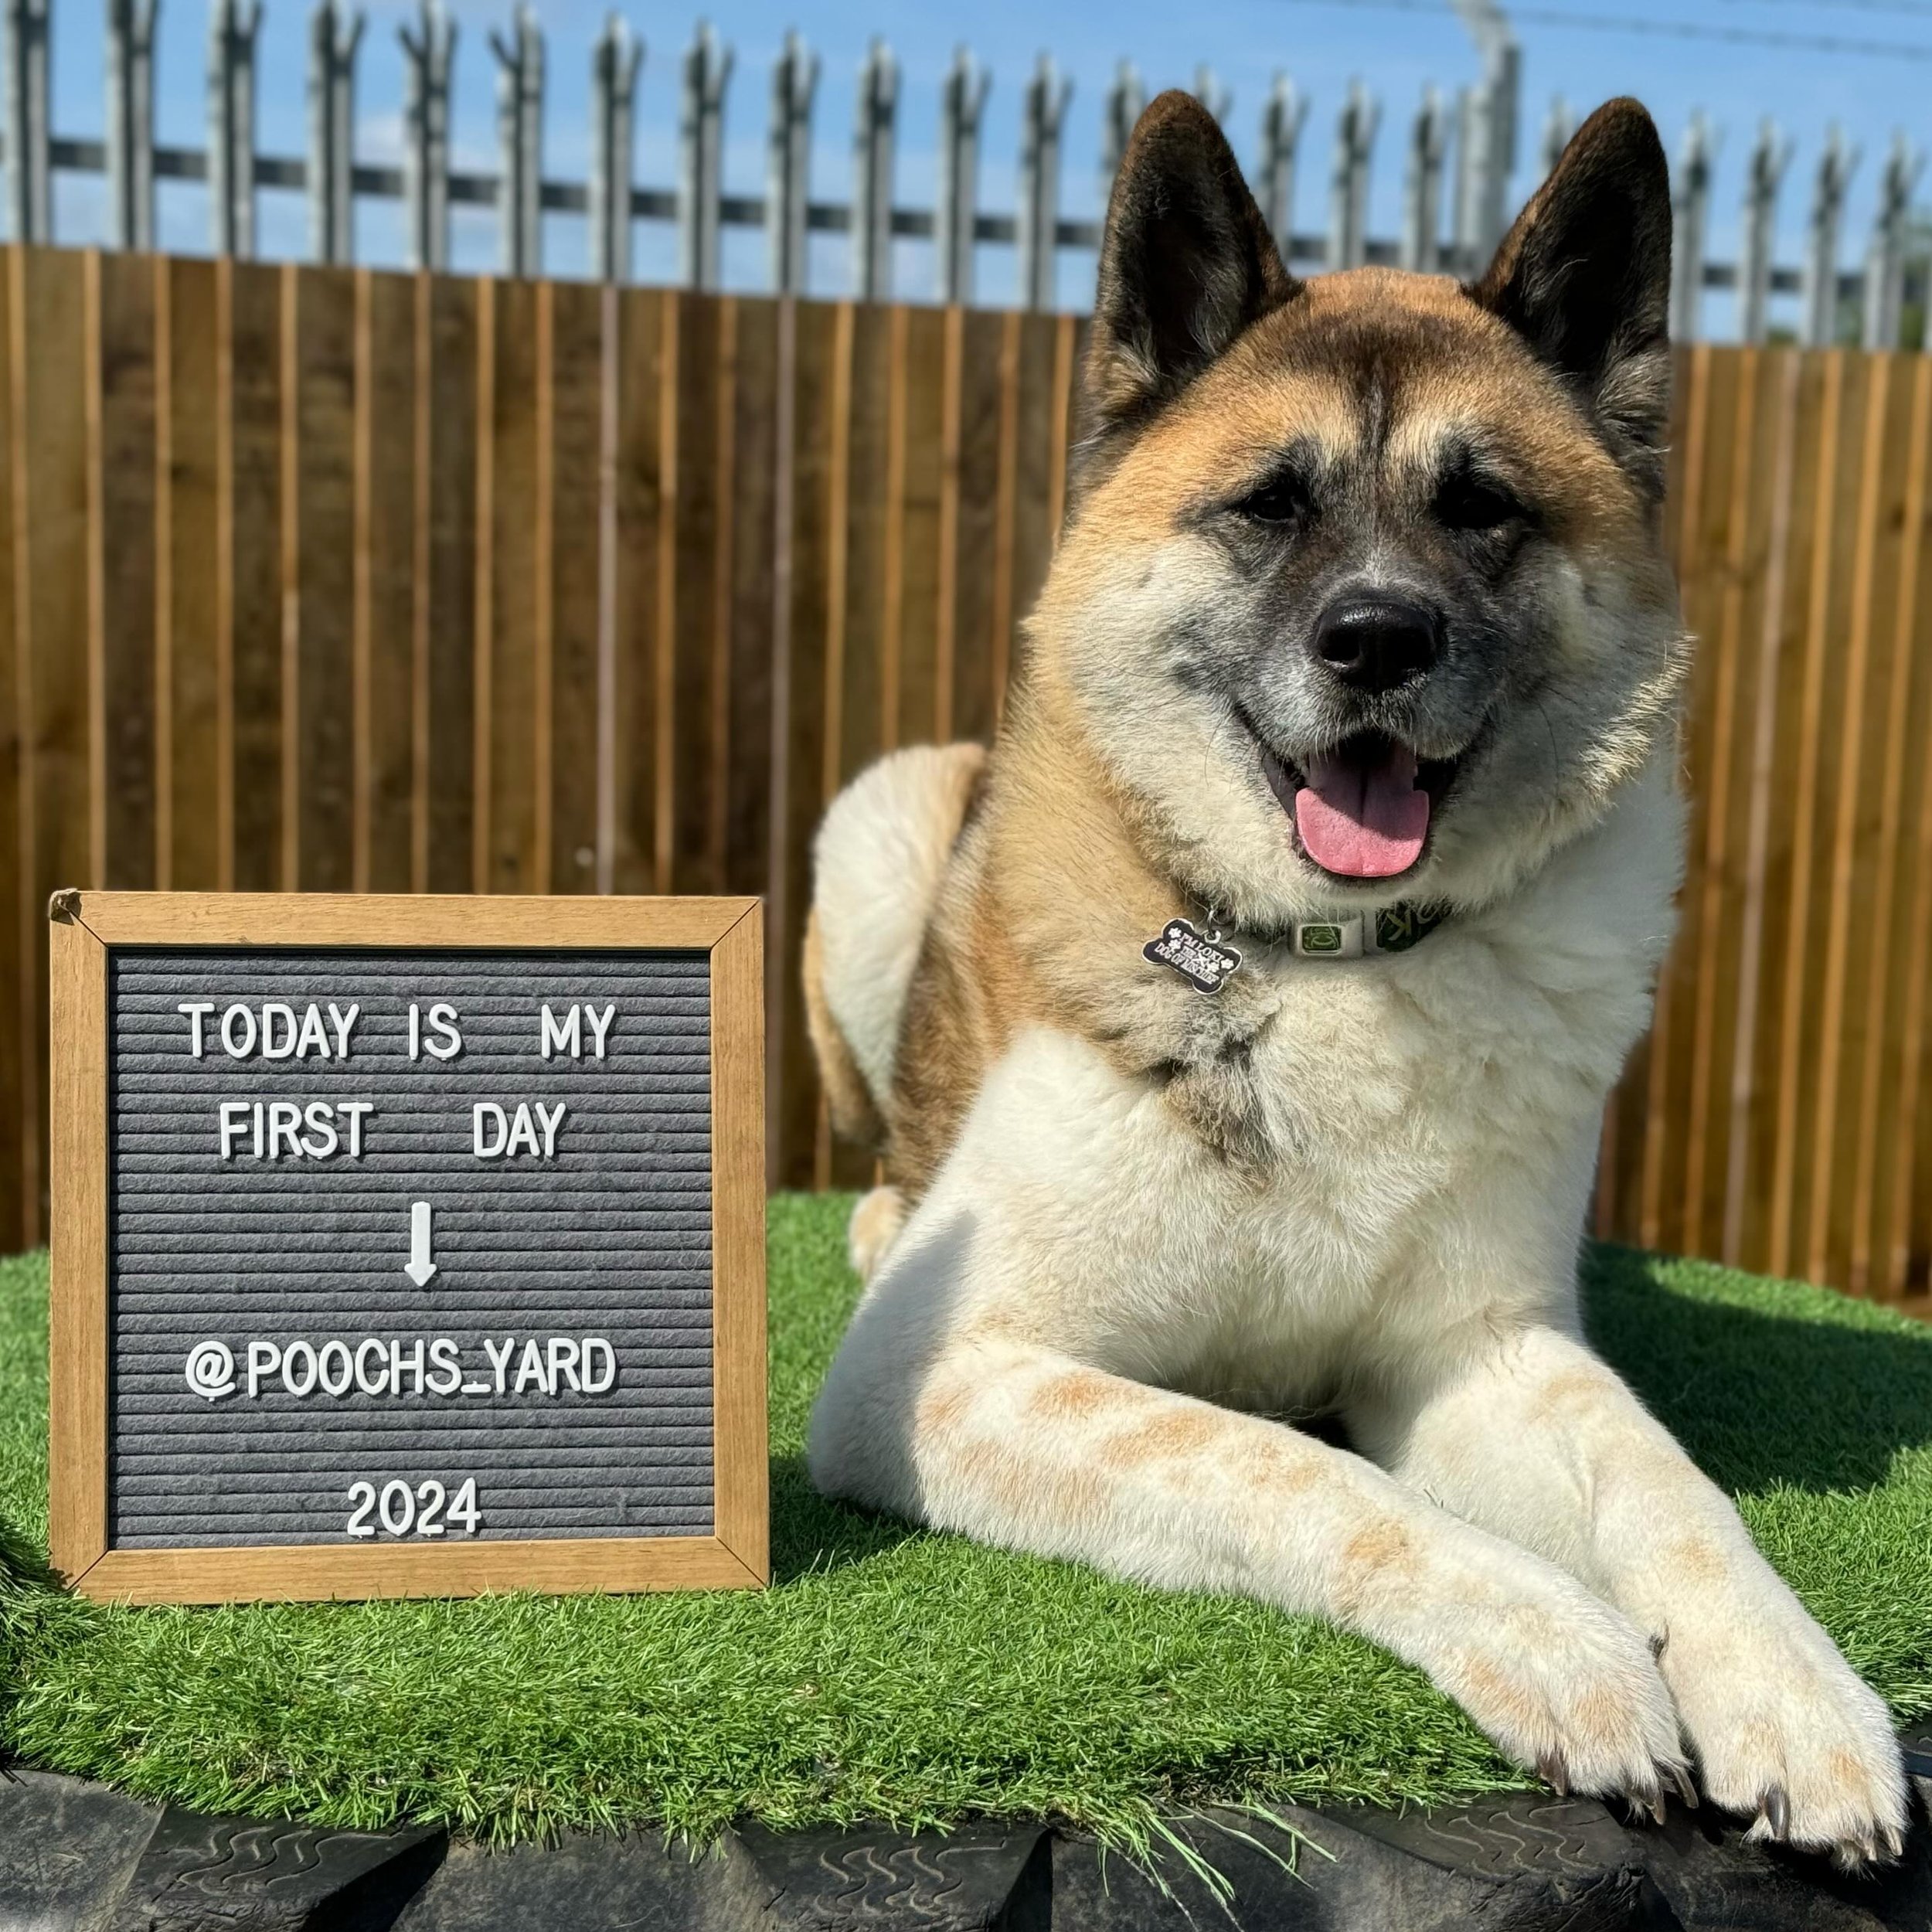 Next up to treat you all today is this handsome boy, this everyone is Loki, a gorgeous giant Akita but he&rsquo;s super soft inside. 
&mdash;
Loki came in and was a little unsure and a little grumbly which is normal for the breed but after a little w